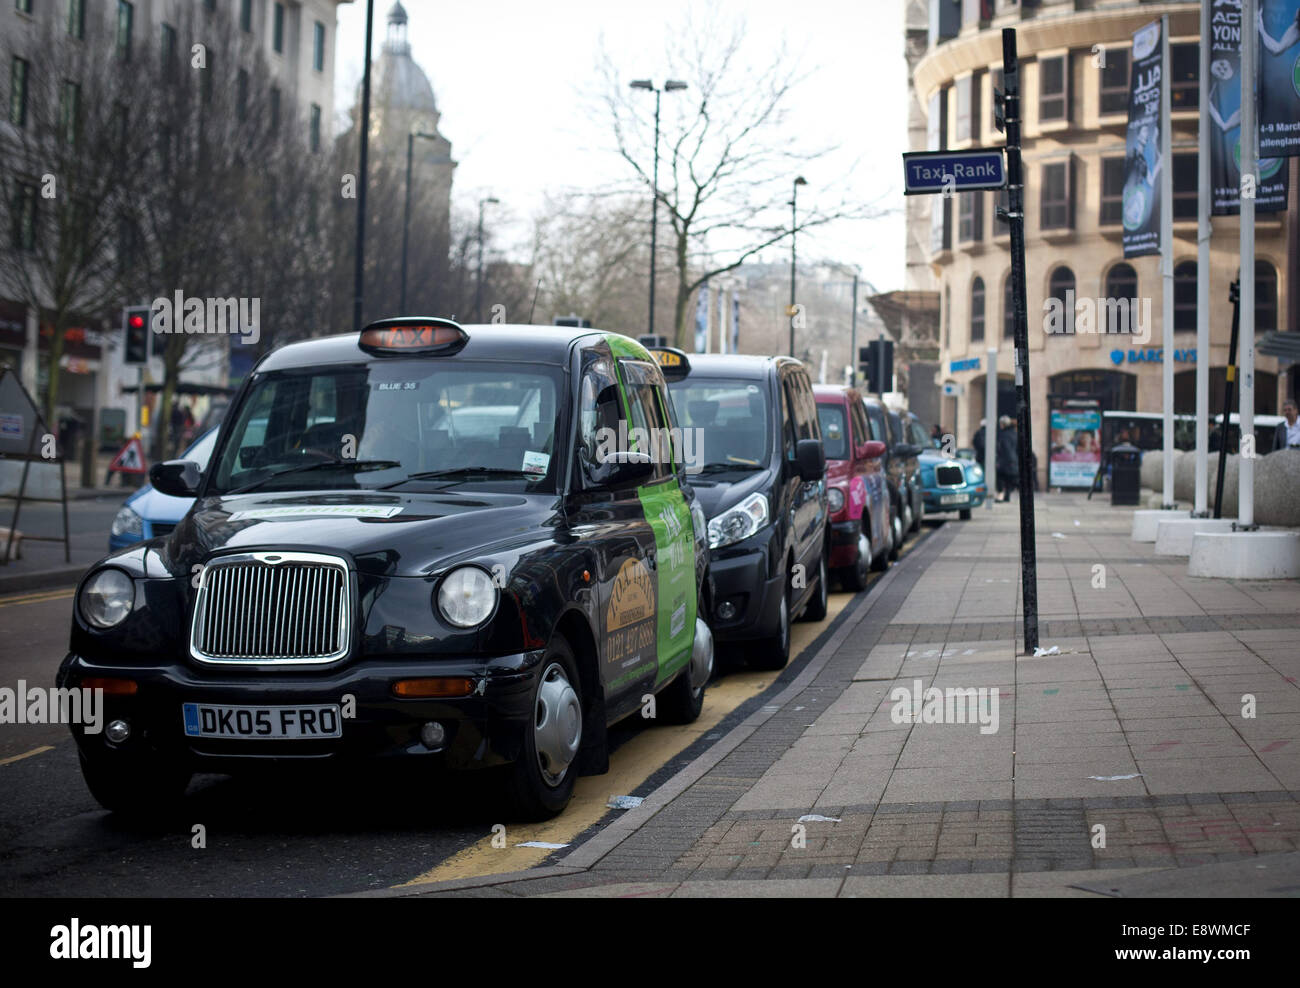 Taxi Rank outside Snow Hill Train Station in Birmingham, West Midlands. Stock Photo